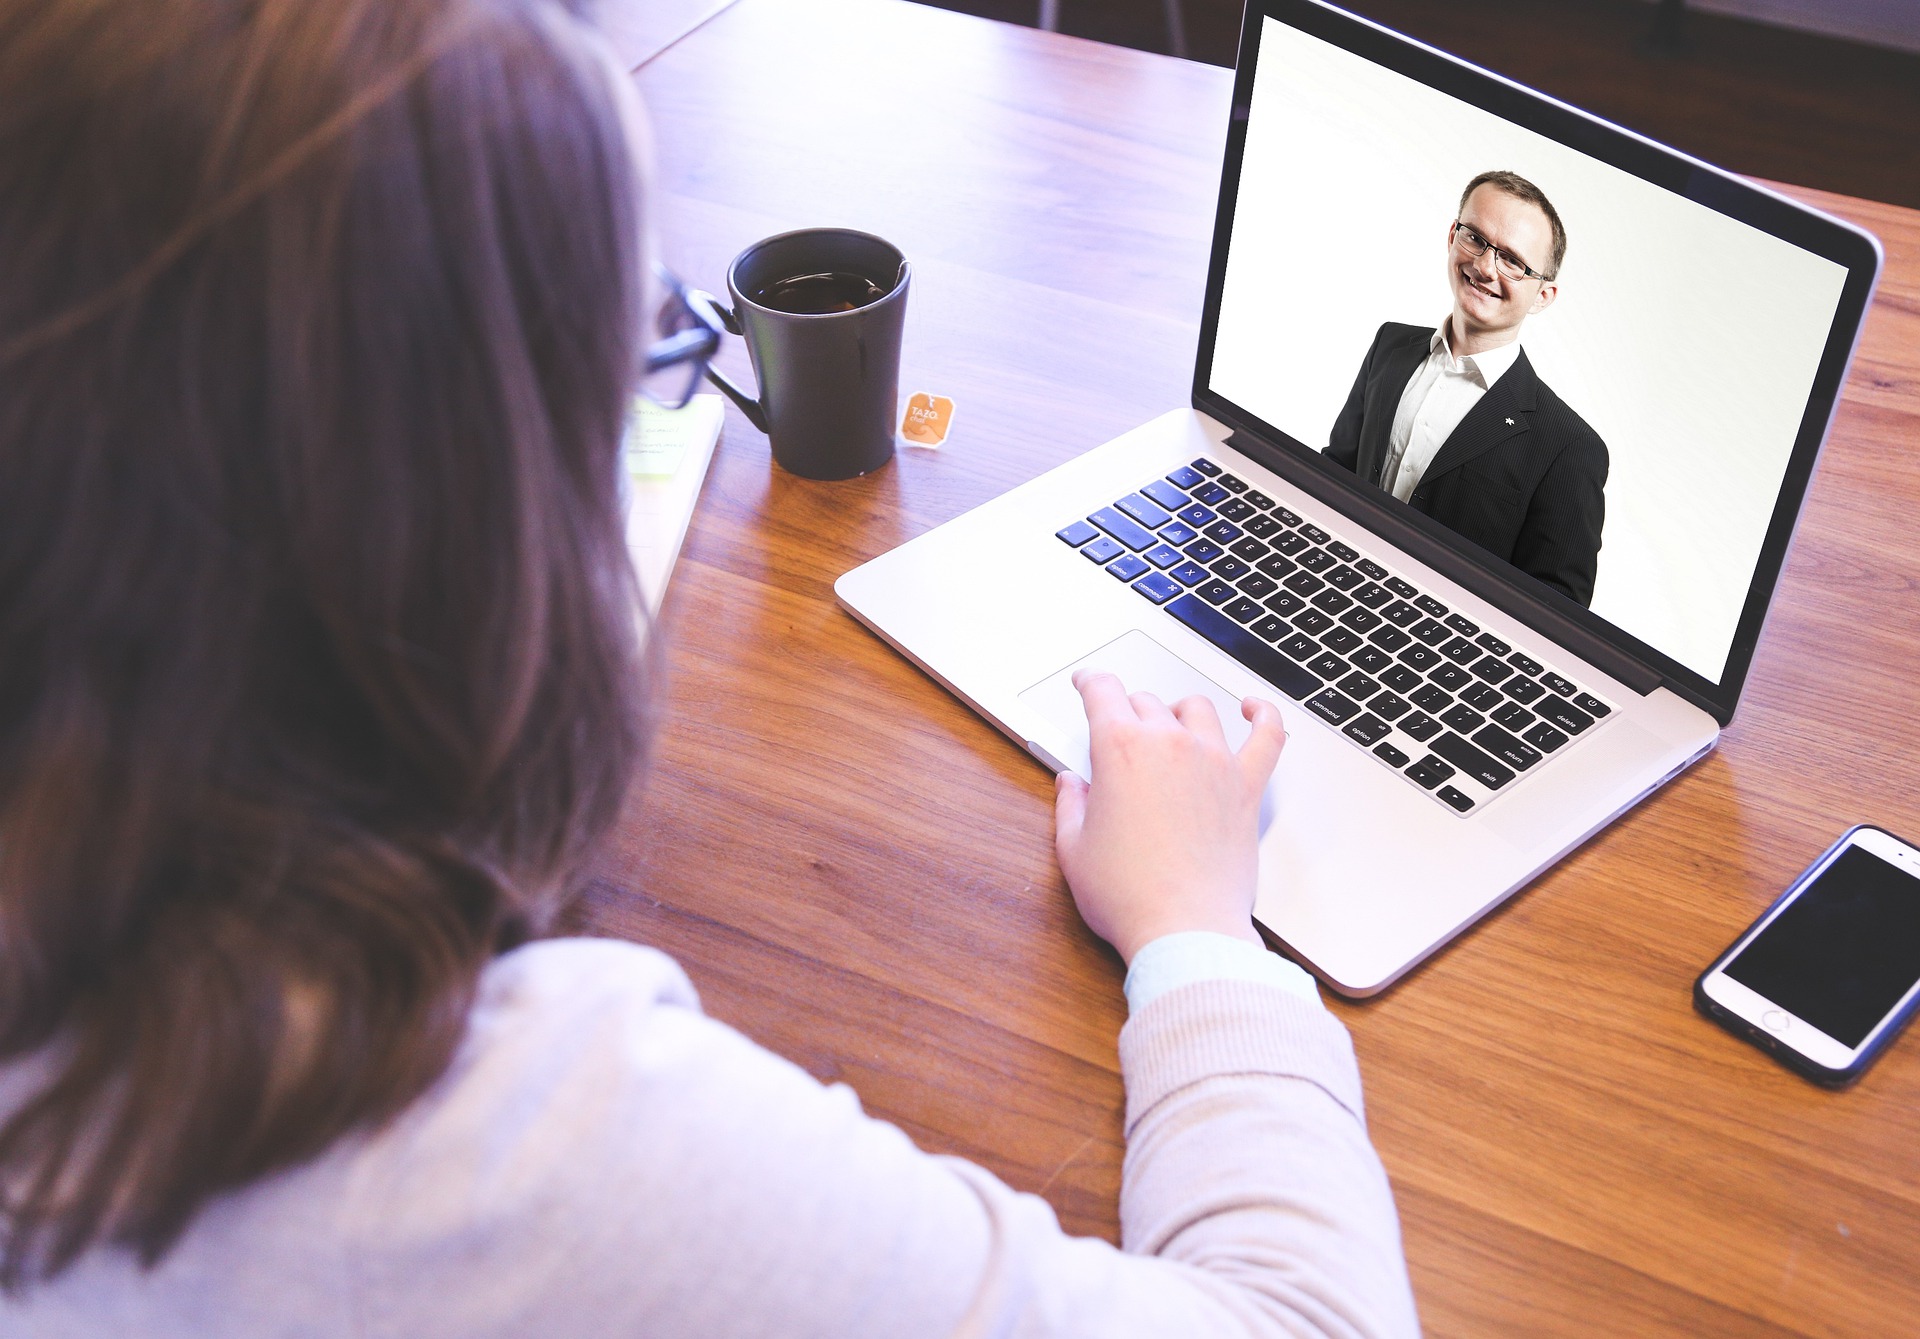 remote, online meeting between employer and employee